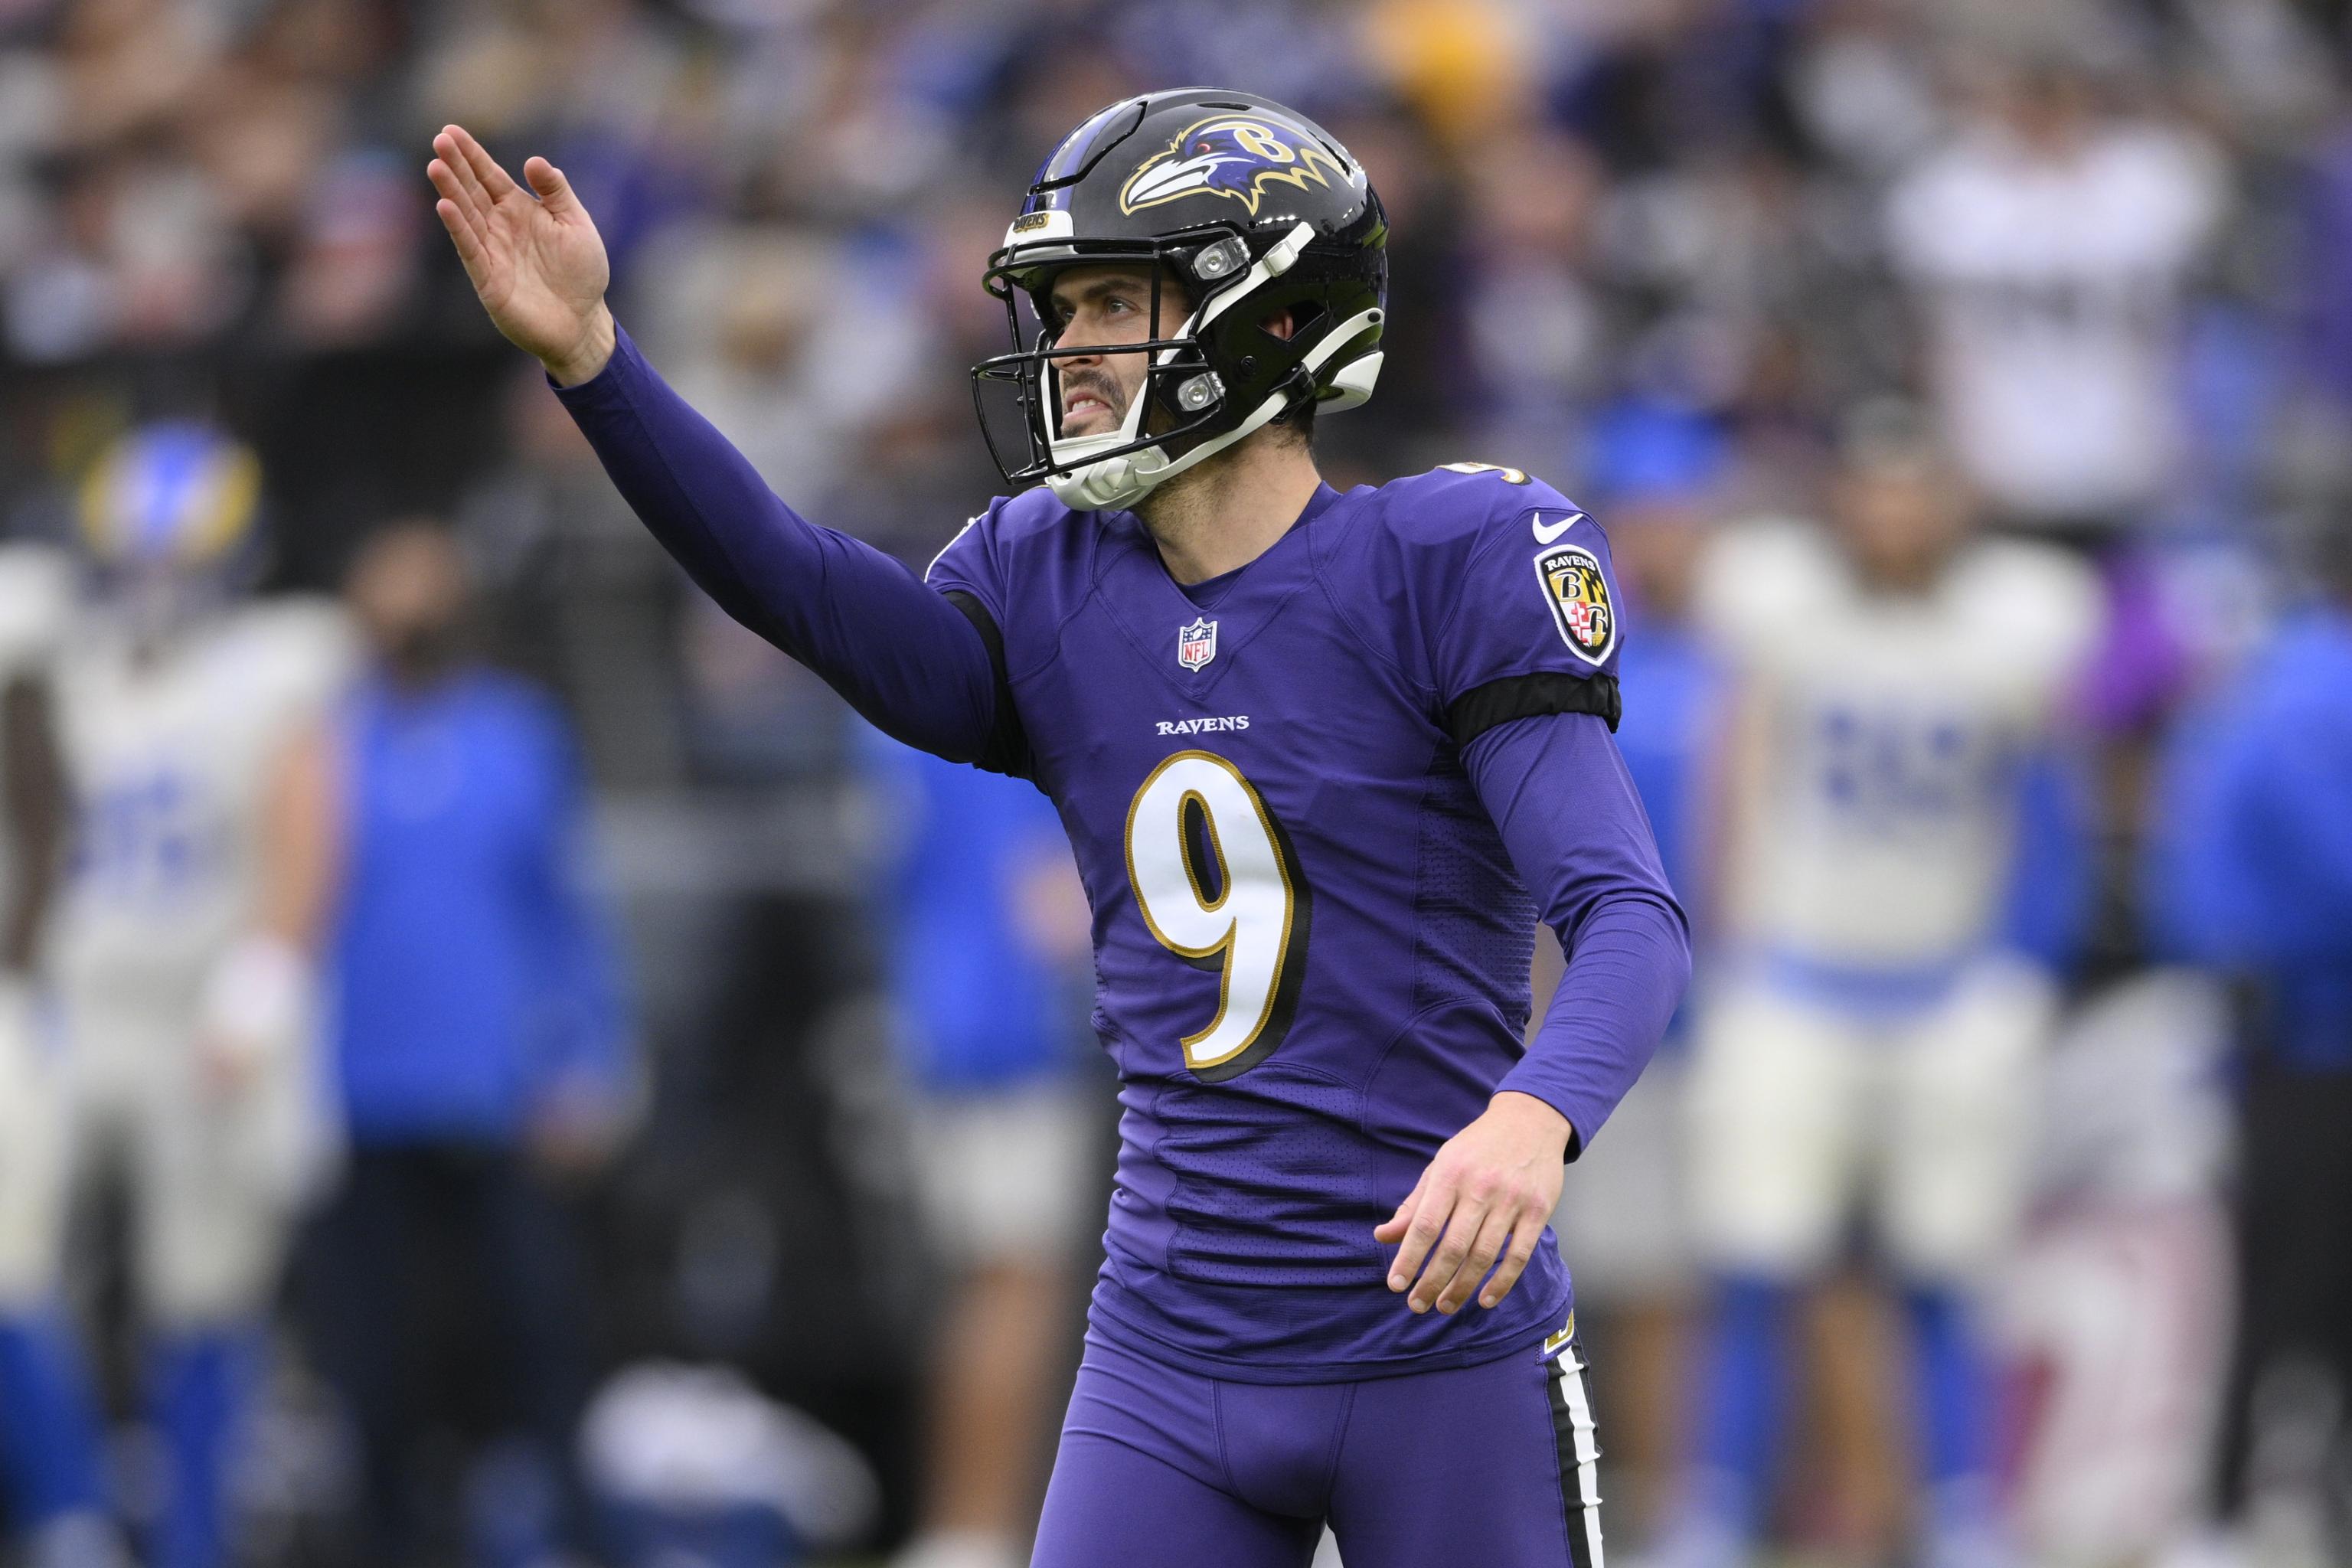 Best kicker in NFL history: Justin Tucker tops the all-time greats